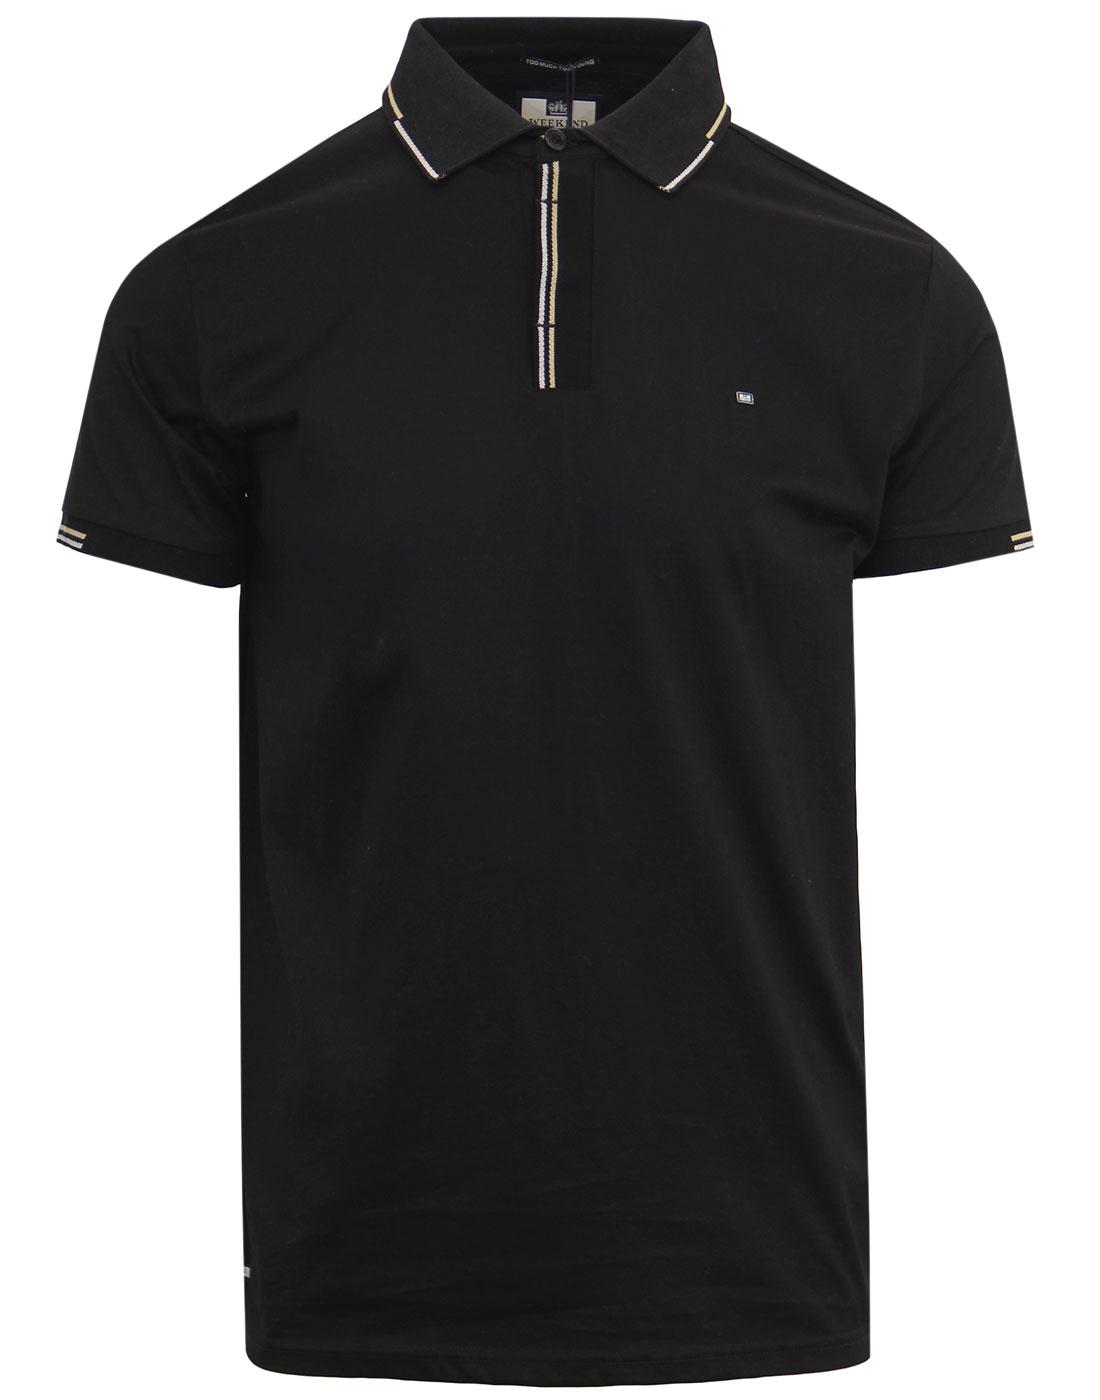 Cage WEEKEND OFFENDER Retro Mod Tipped Polo BLACK